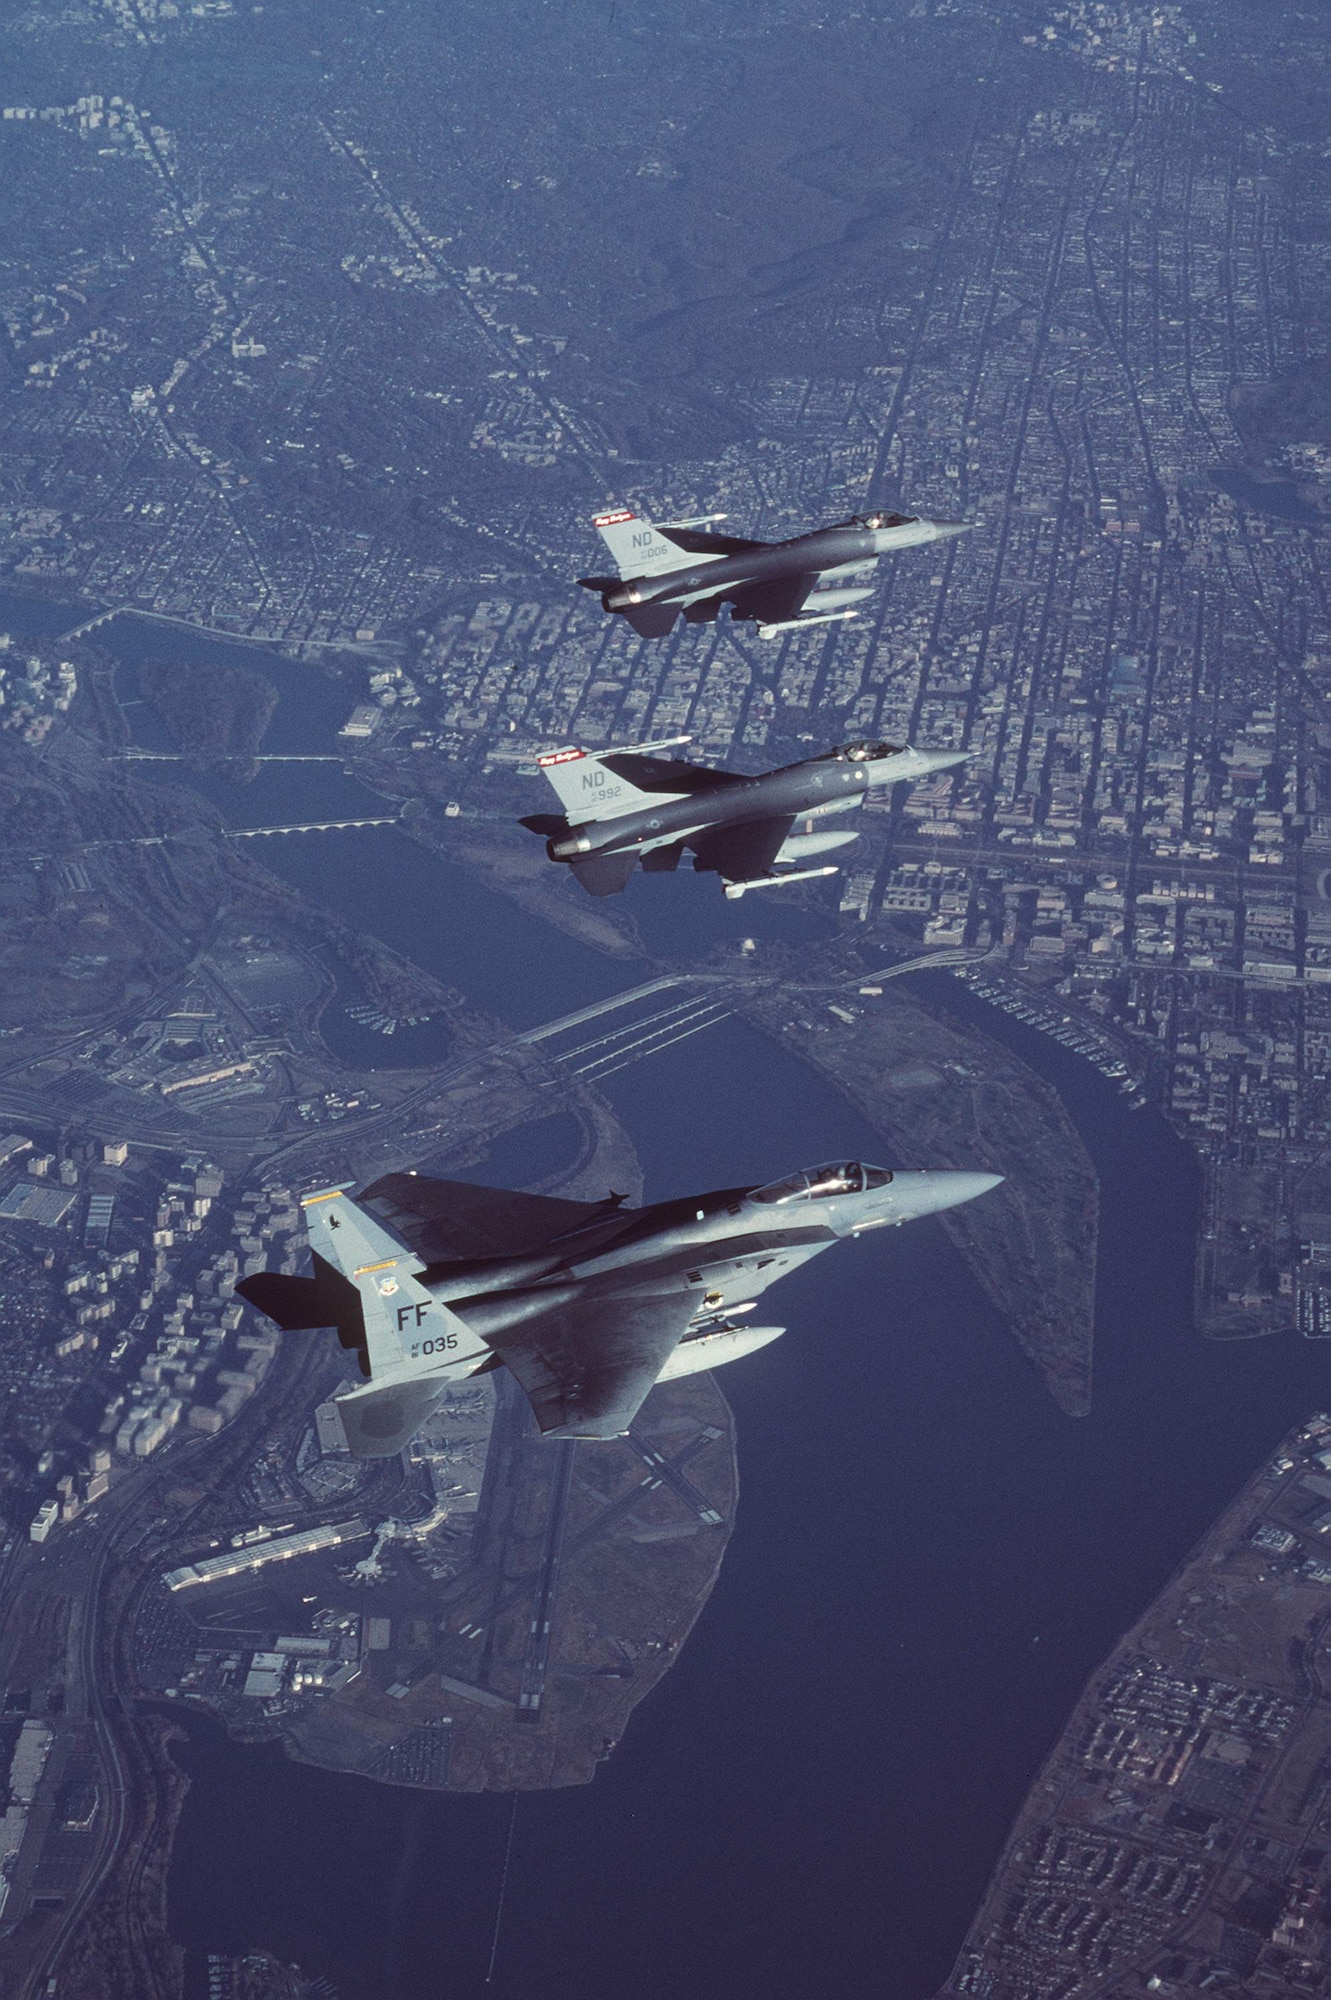 Two Air-Defense Fighter F-16A Fighting Falcons from the North Dakota Air National Guard’s 178th Fighter Squadron lead an F-15C Eagle from the 27th Fighter Squadron at Langley Air Force Base, Va., in formation during a combat air patrol mission in support of Operation Noble Eagle. More than 11,000 airmen -- the majority Air National Guard and Air Force Reserve -- have generated more than 7,500 sorties to patrol American skies 24/7 since Sept. 11, 2001. (U.S. Air Force photo by Staff Sgt. Greg L. Davis)